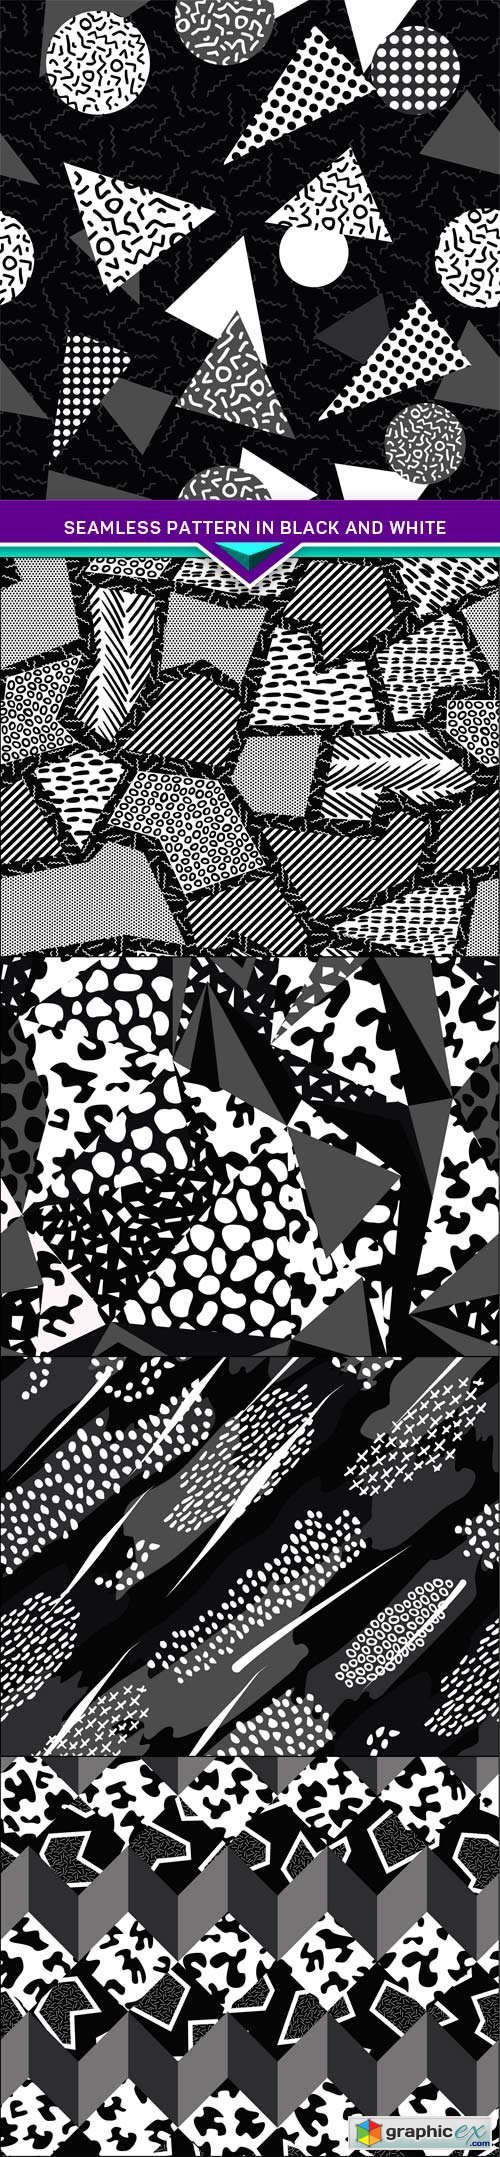 Geometry retro seamless pattern in black and white 5x EPS